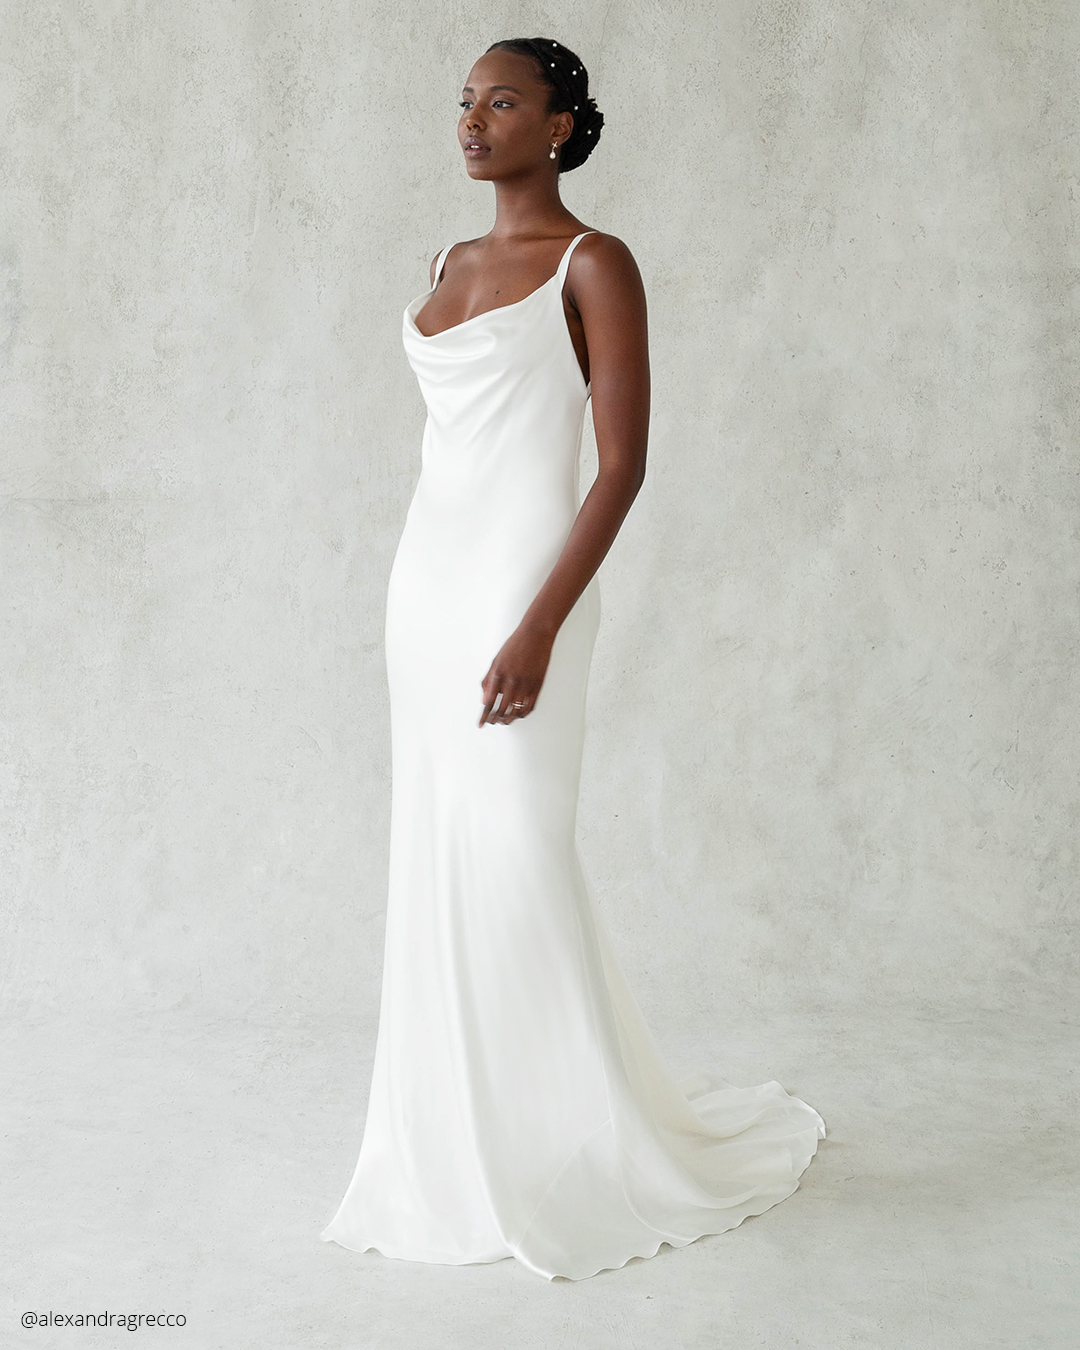 Casual Wedding Dresses: 15 Bridal Gowns + Faqs